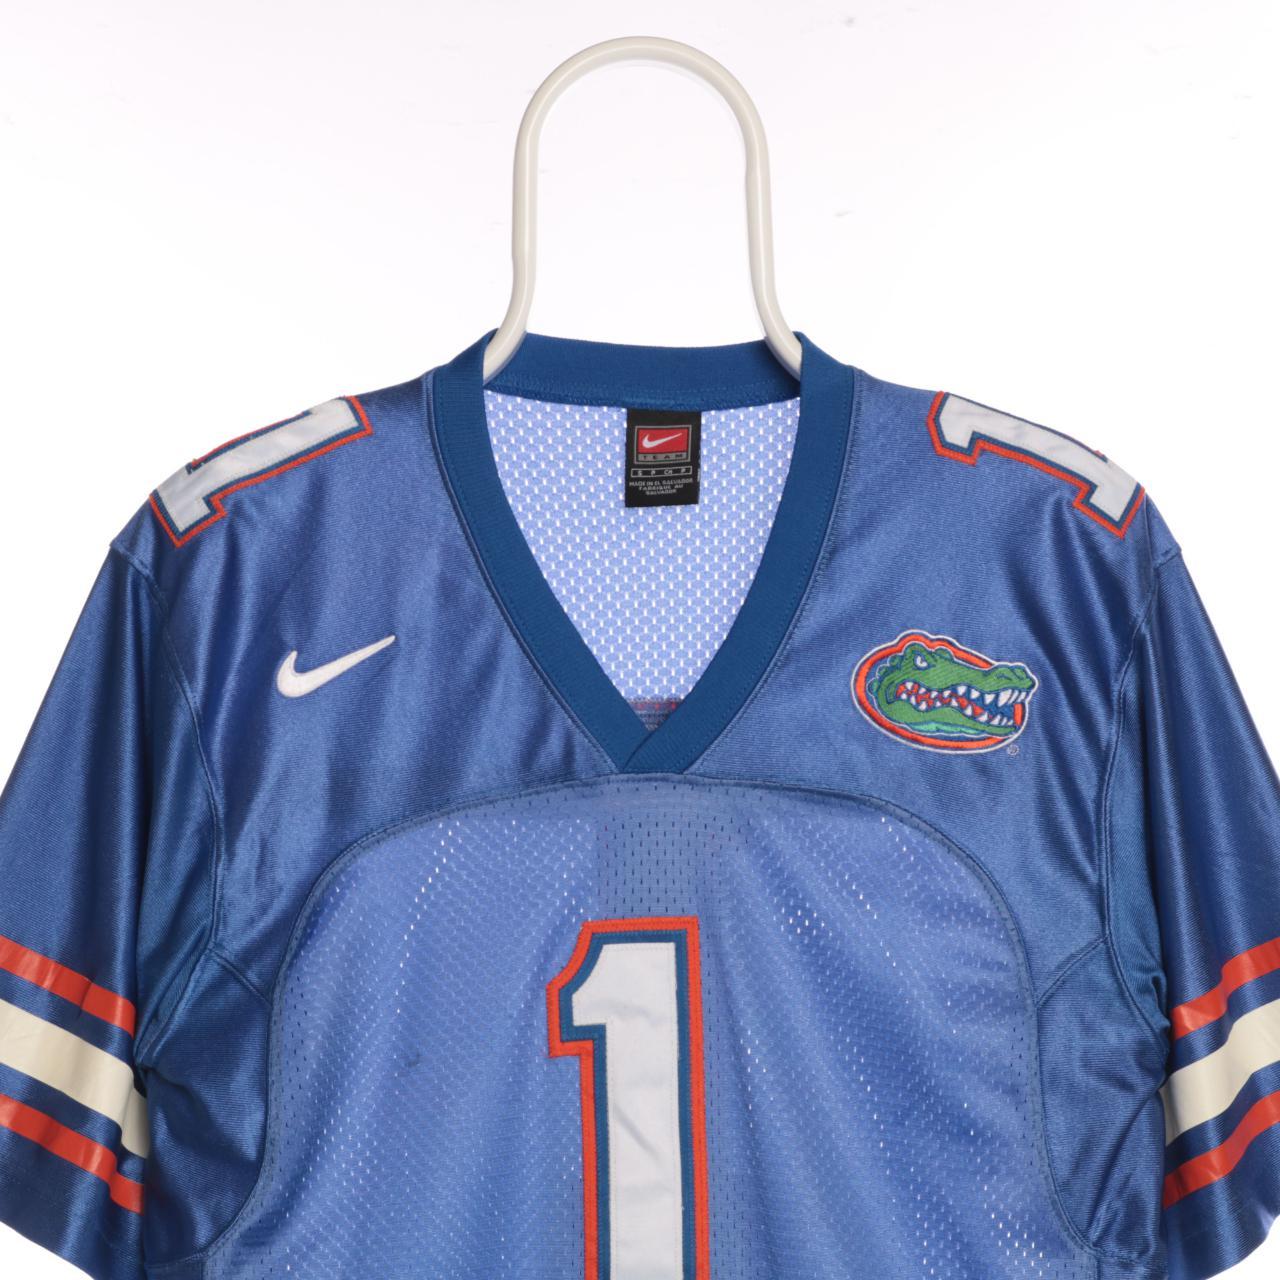 Product Image 3 - Vintage Nike Jersey

Nike 90's Jersey
Embroidered